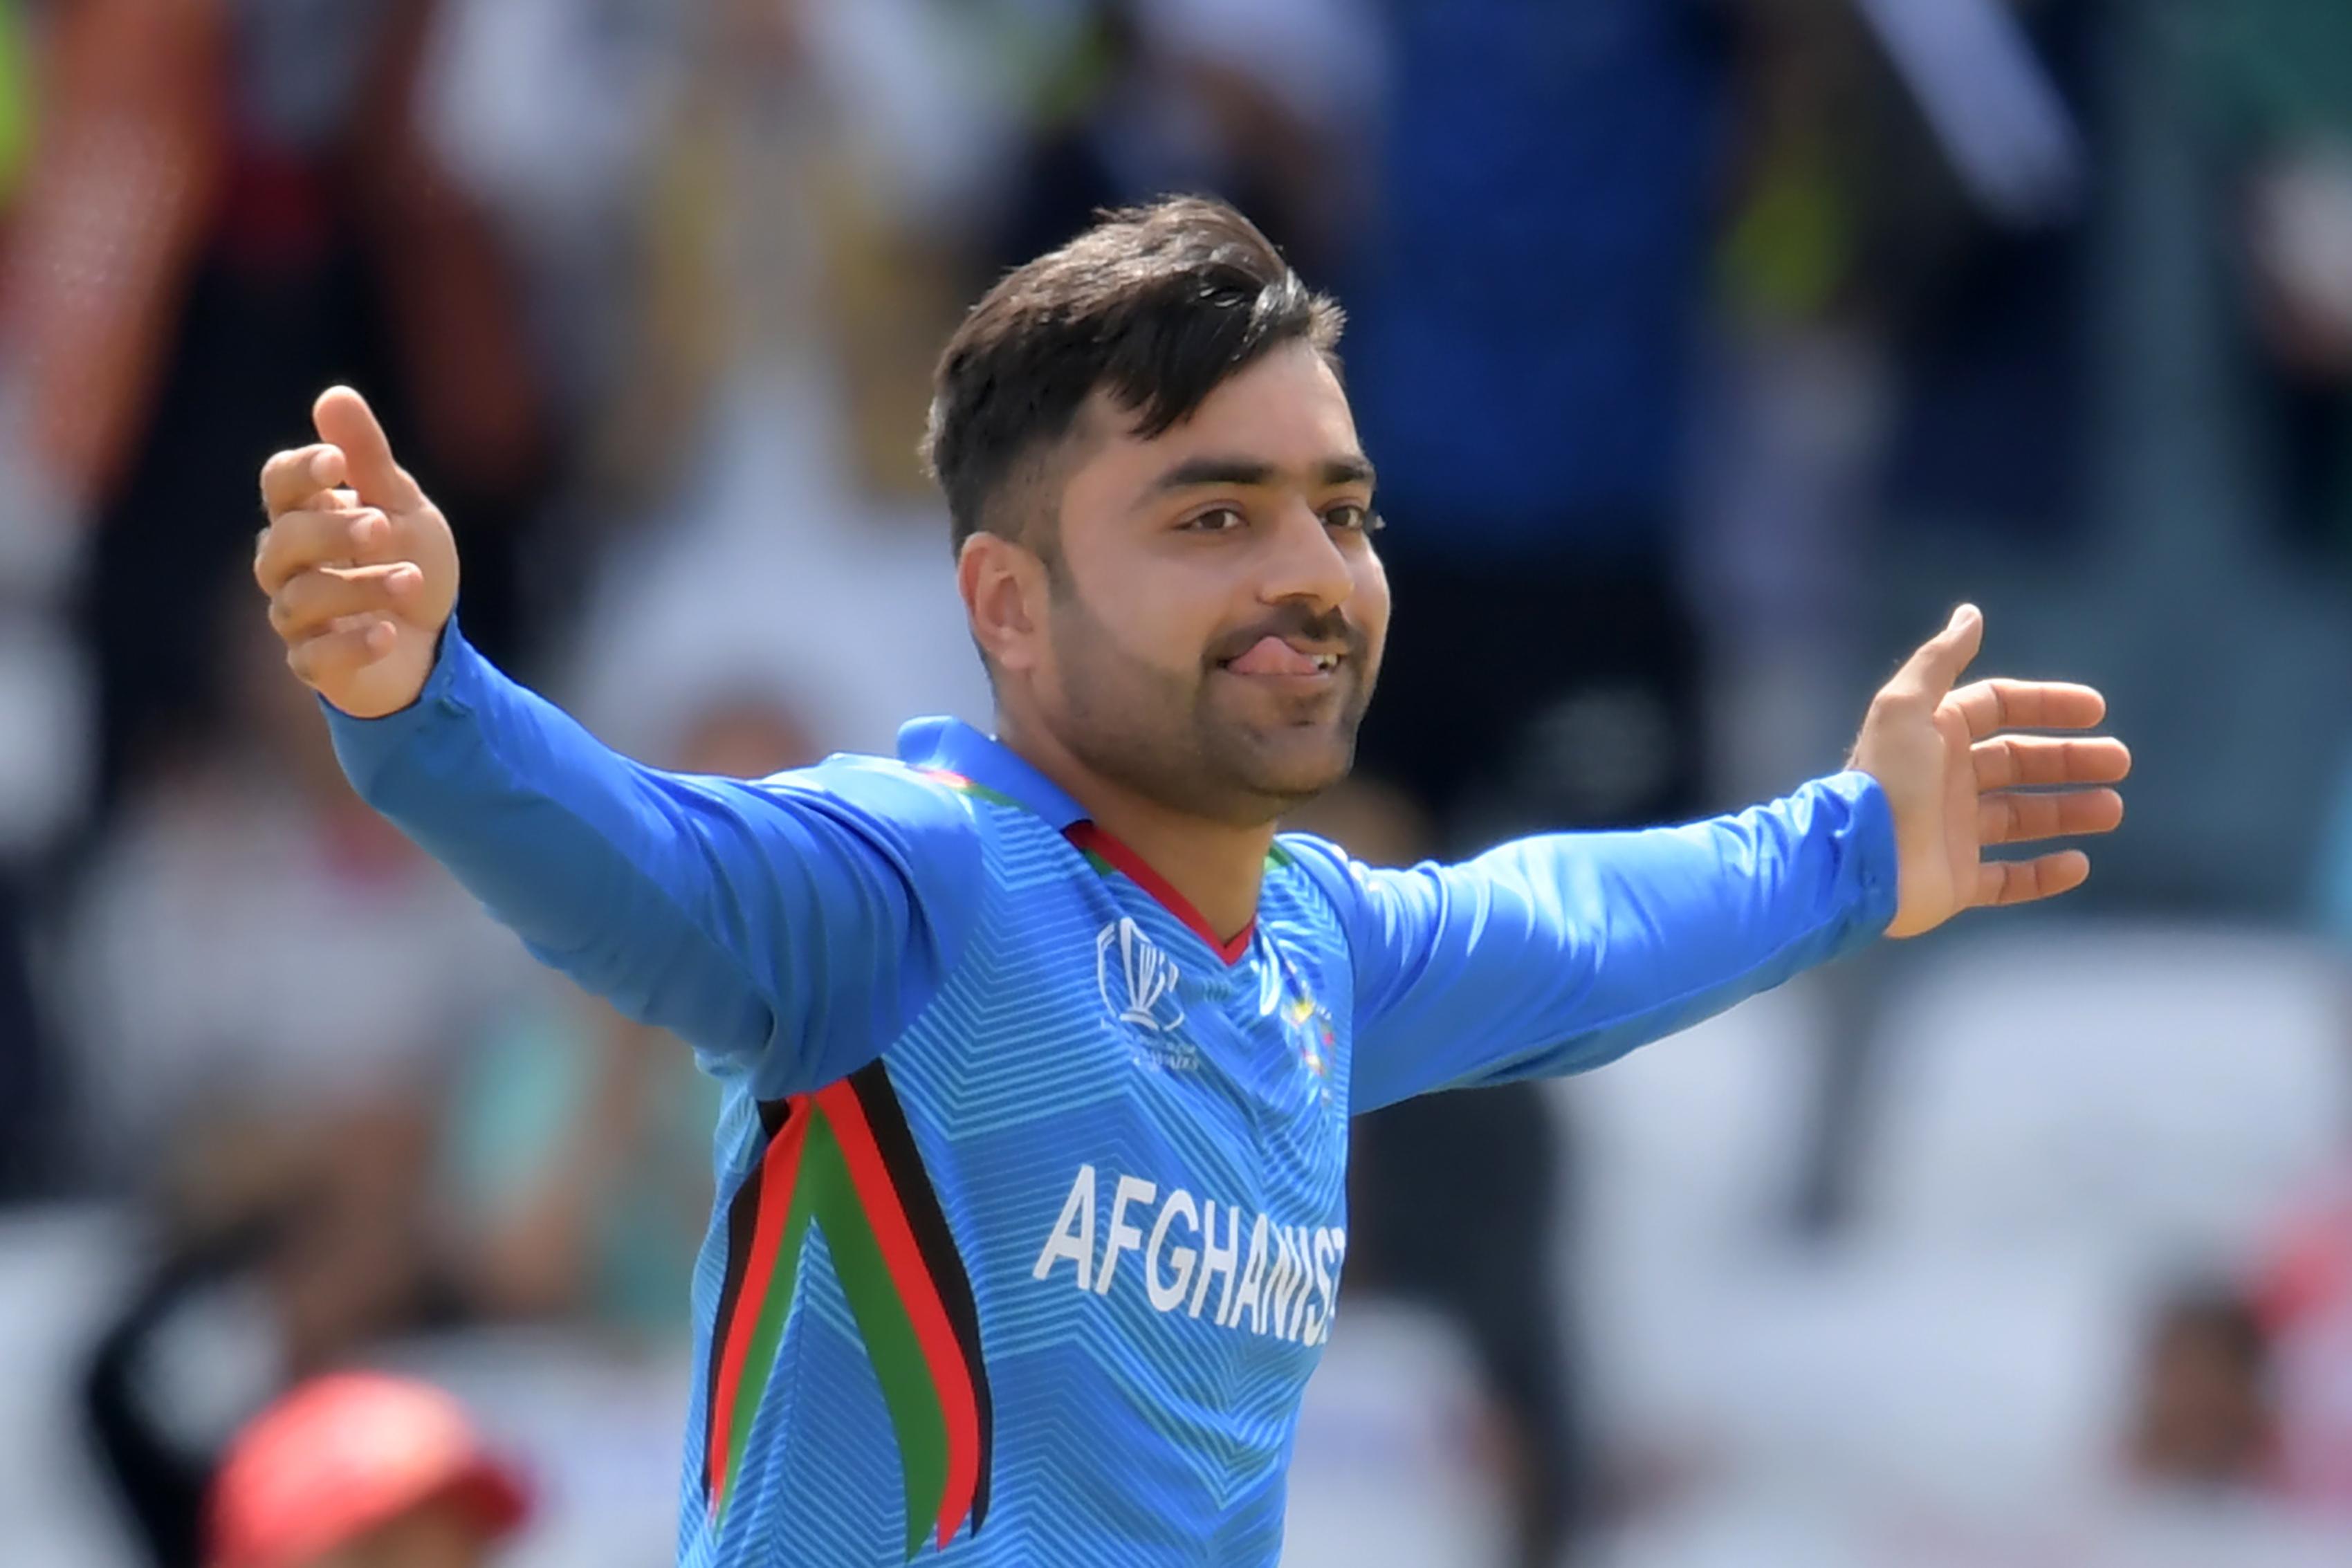 T20 World Cup 2021 | Afghanistan has done well and they will challenge us with spin bowling, says Vikram Rathour 